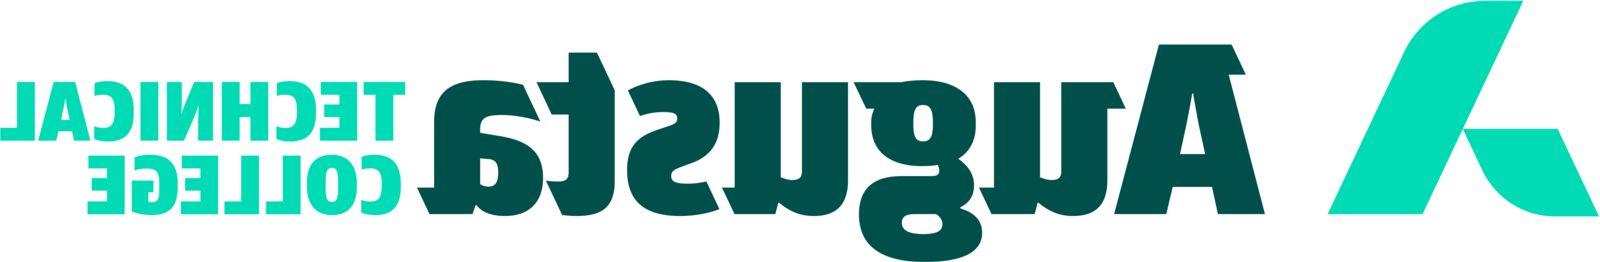 An uppercase abstract A in Mint Green composed of a smaller leg representing Augusta Technical College supporting the larger leg representing the Augusta Community and economy. The word Augusta is in large, Heritage Green font to the right of the abstract A with the words Technical and College stacked horizontally in smaller, Mint Green font to the right of the word Augusta.